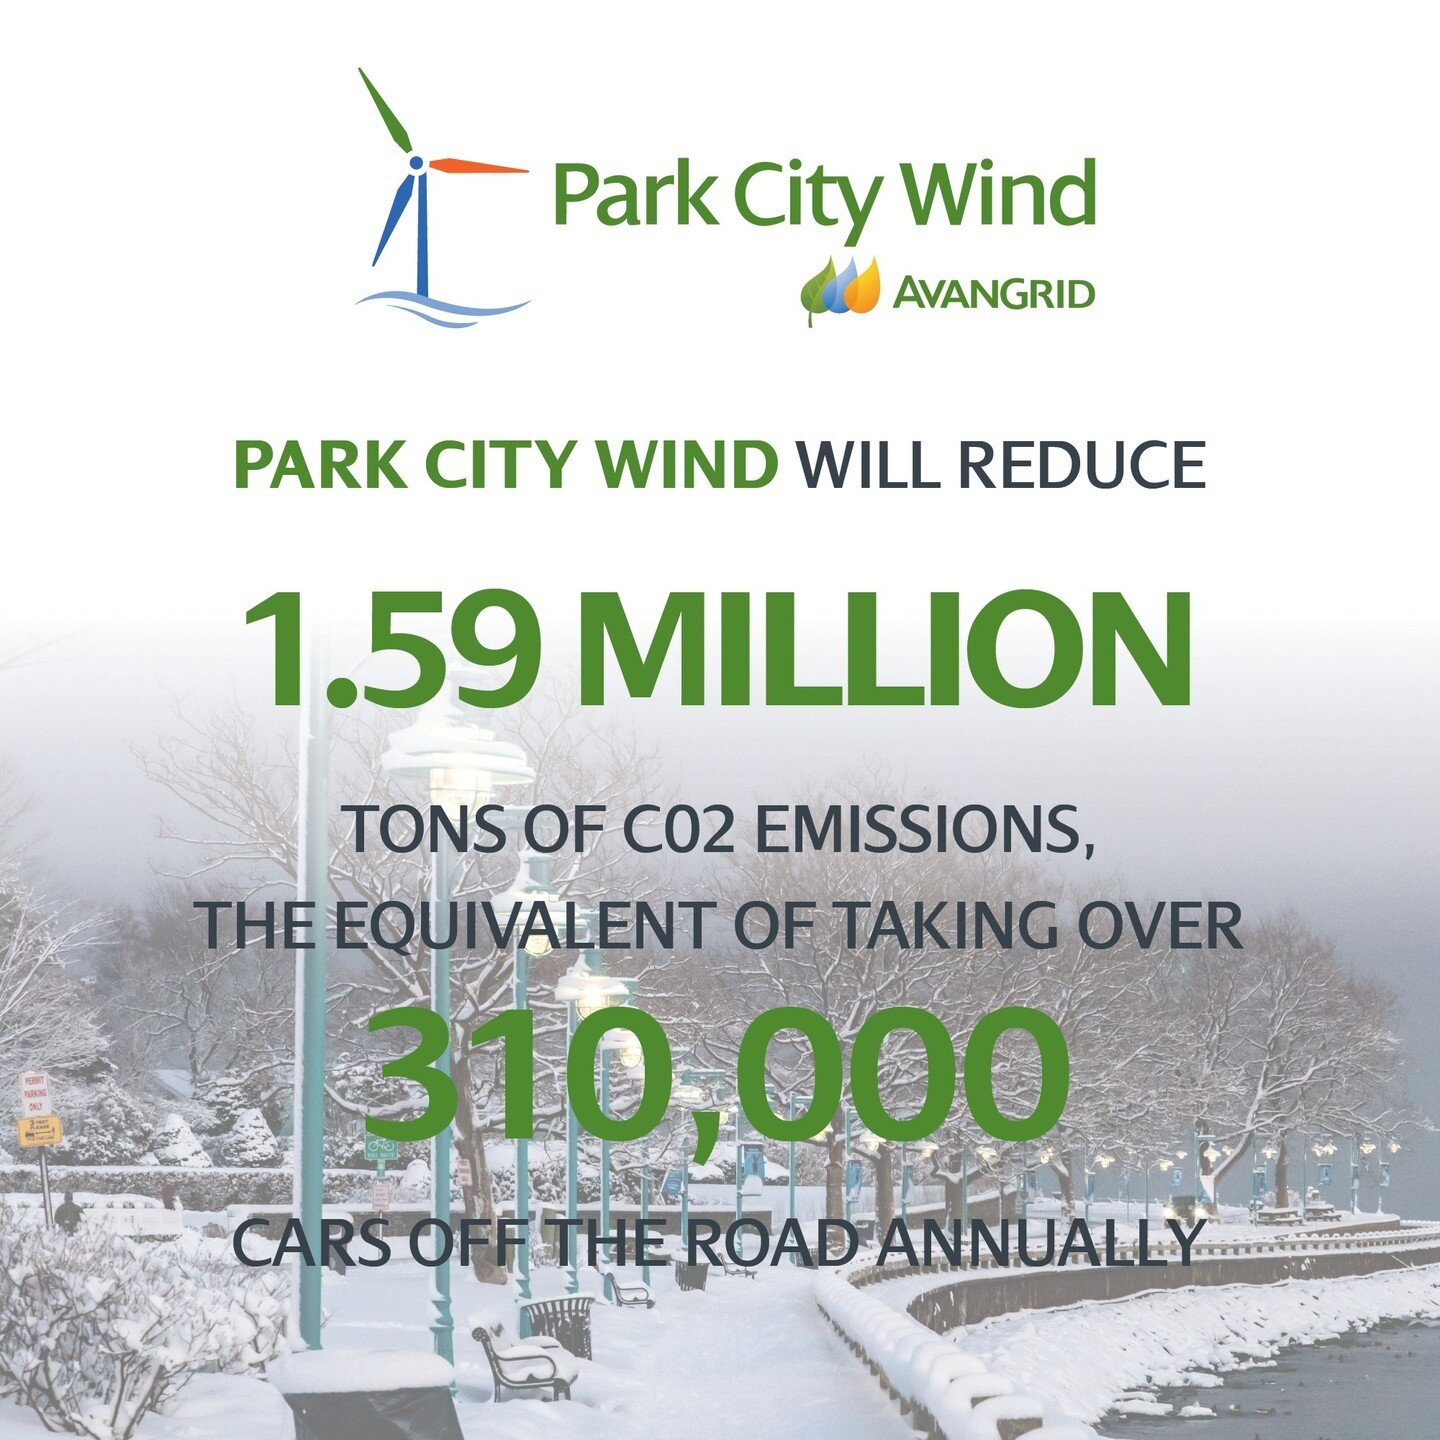 Park City Wind will cut greenhouse gasses by approximately 1.59 million tons annually, the equivalent of taking more than 310,000 cars off the road each year. #ParkCityWind #CleanEnergy #ClimateAction